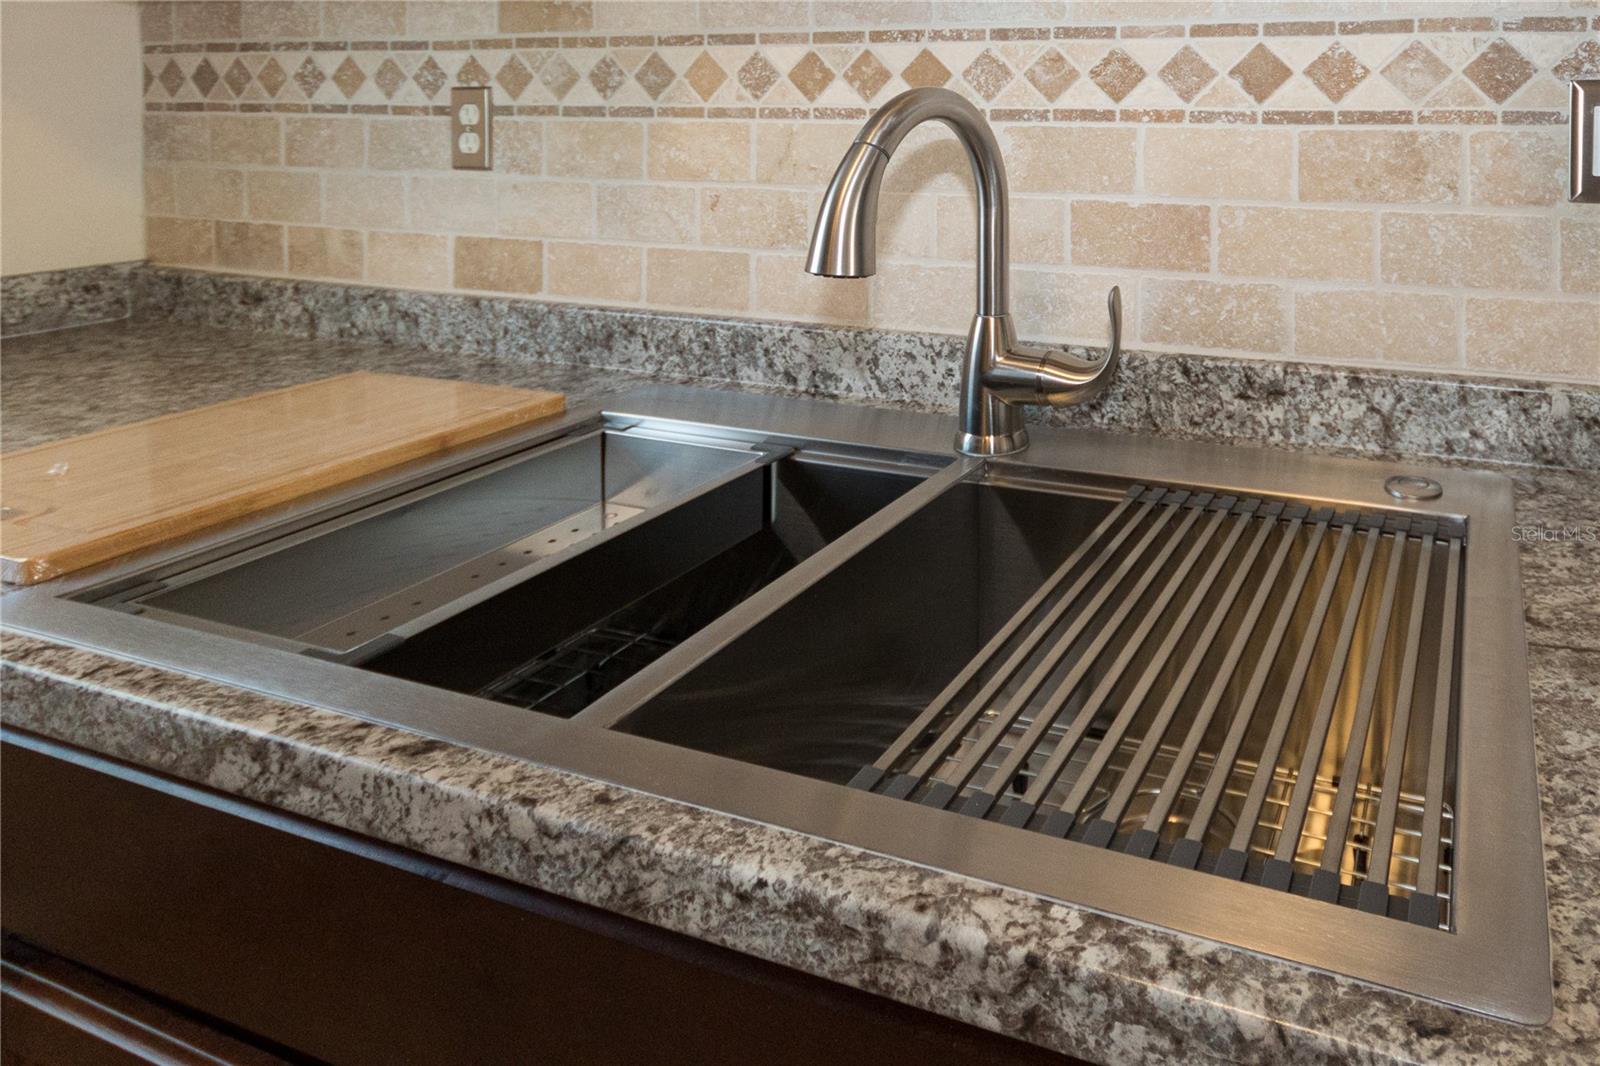 New large stainless steel sink